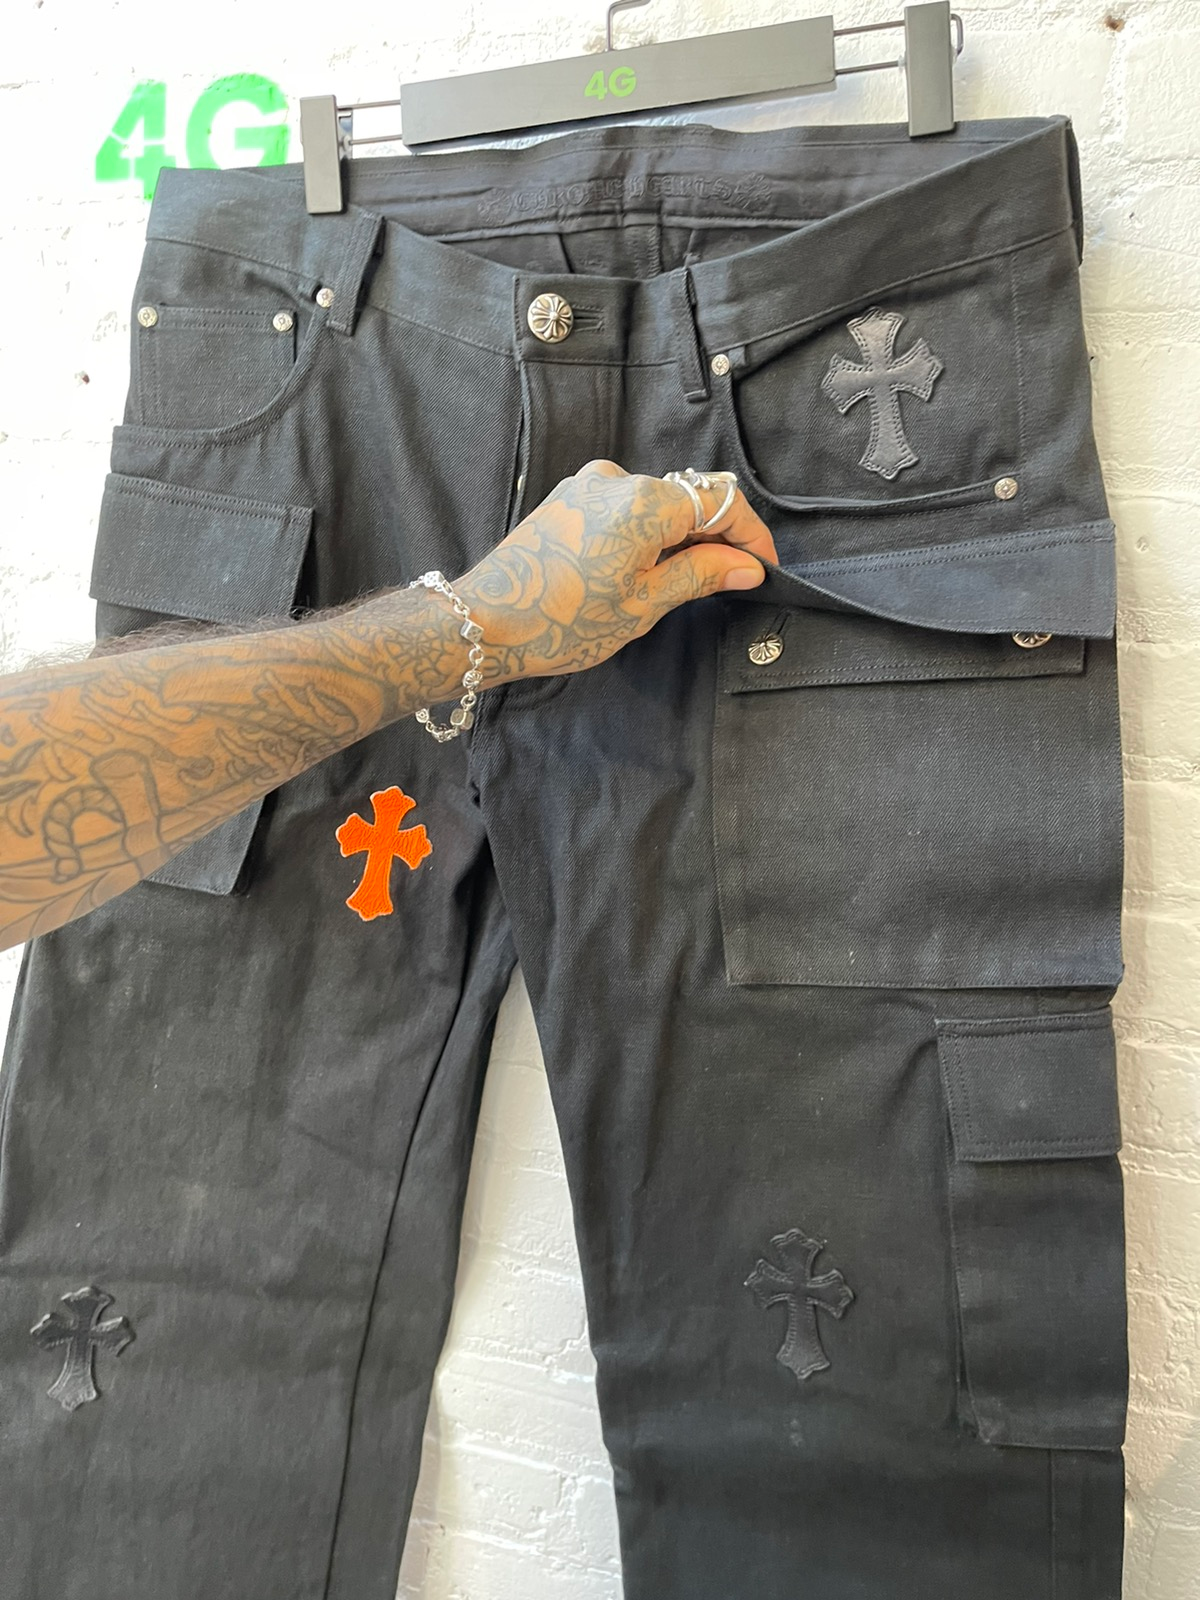 Chrome Hearts Distressed Cross Jeans - ShopperBoard